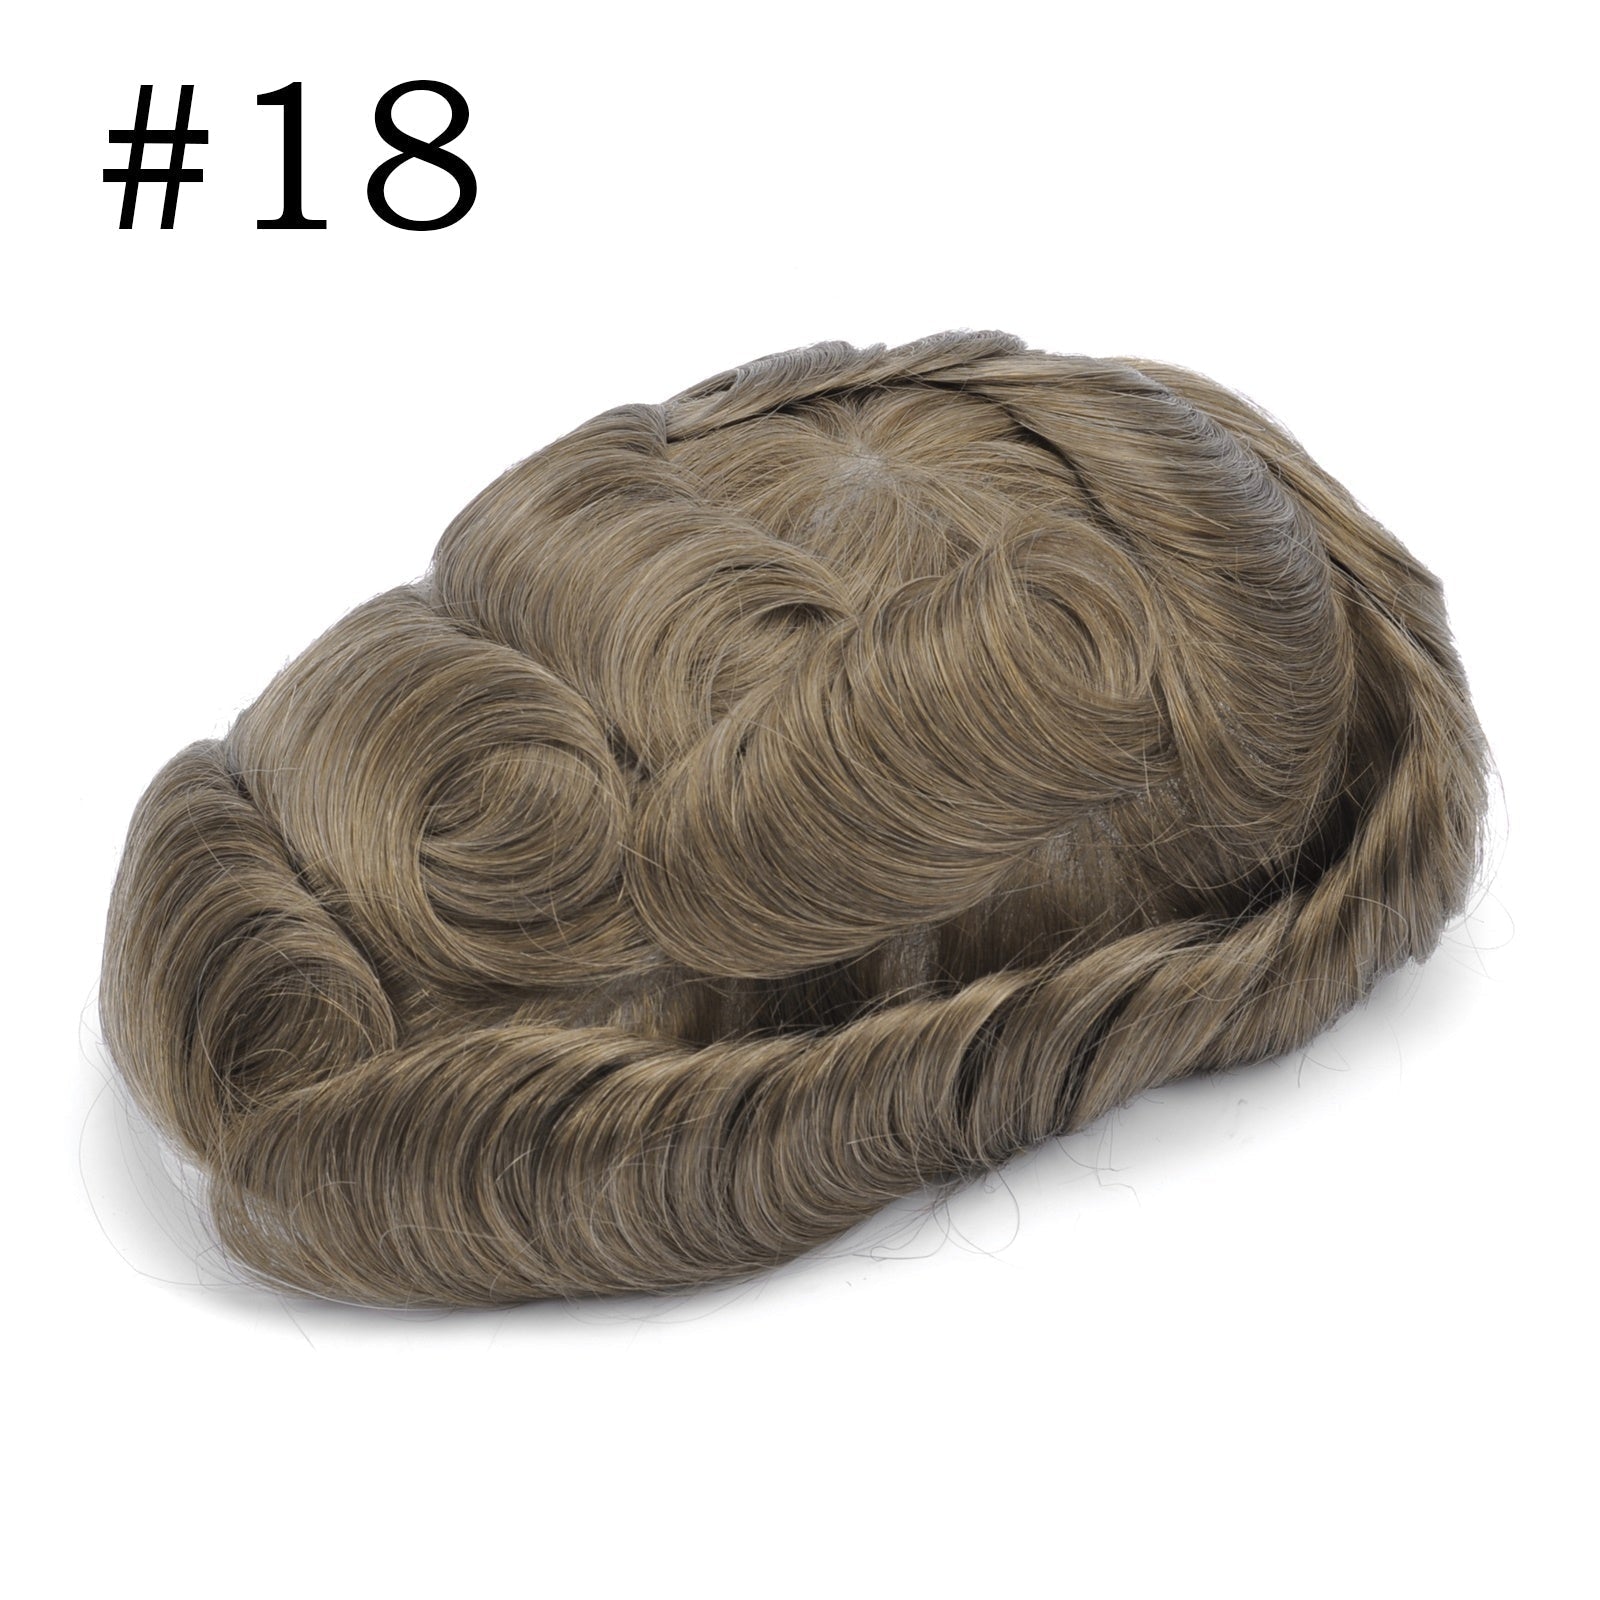 GEXWIGS 0.08-0.1mm Thin Skin Toupee Hair Replacement Durable | TS.